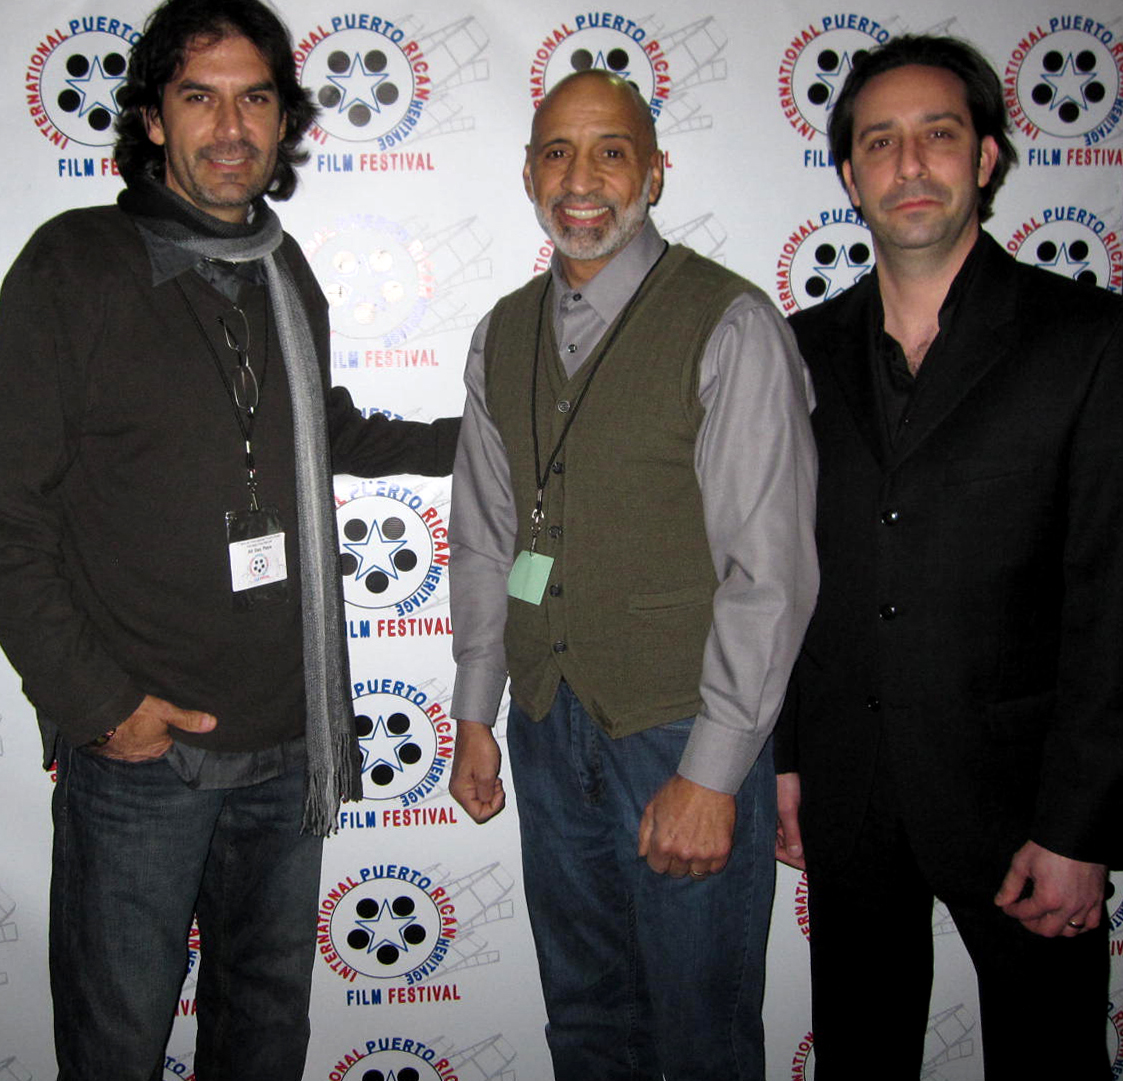 William Rosario, Gray Cruz Cottes and Bill Sorice at the 1st Annual International Puerto Rican Heritage Film Festival